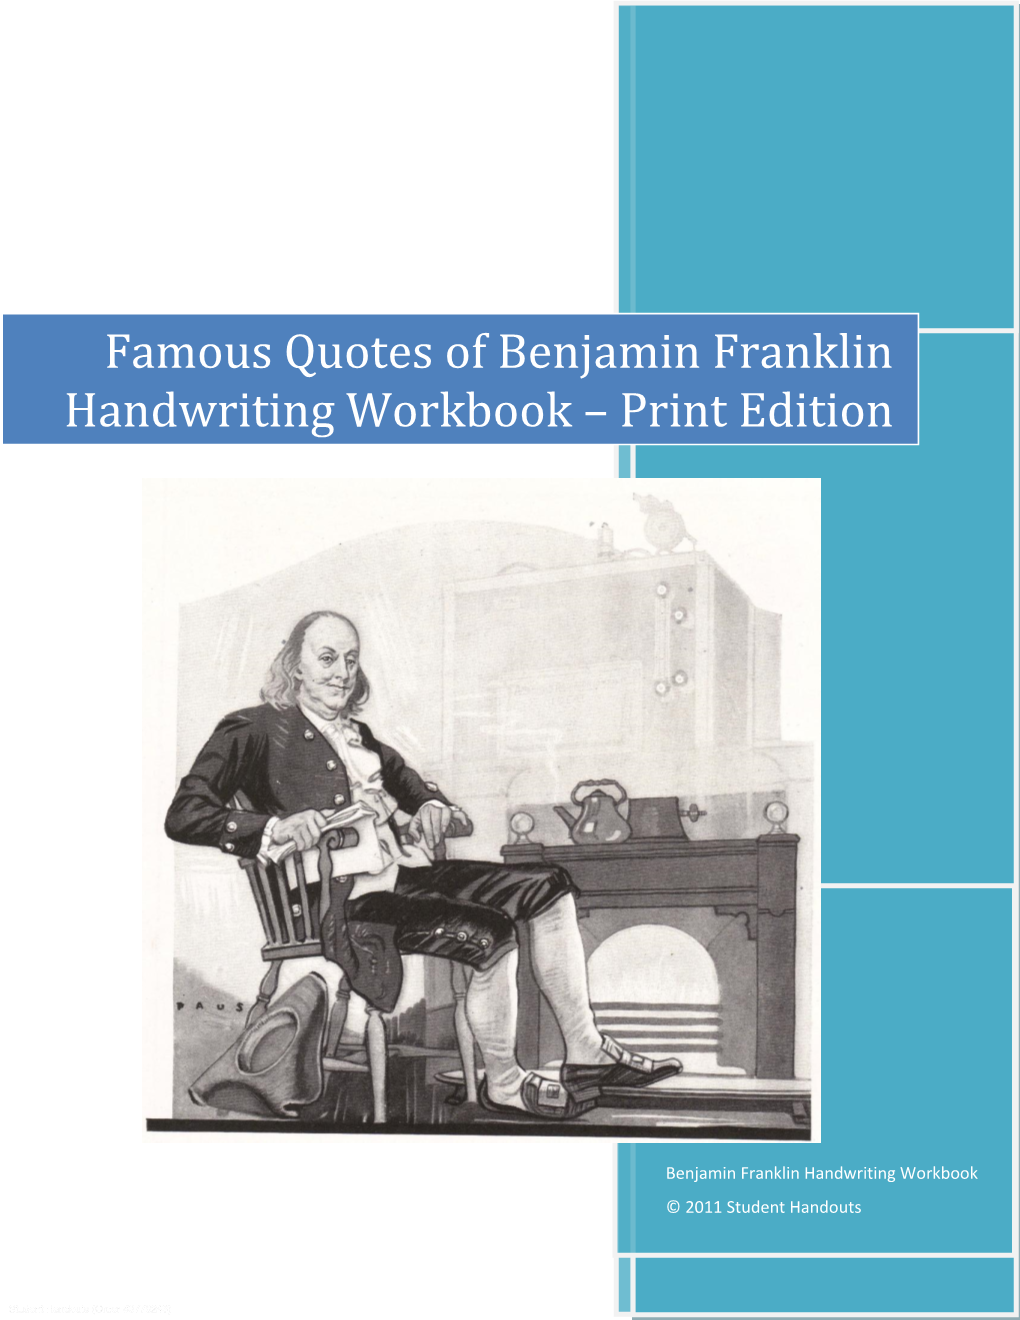 Famous Quotes of Benjamin Franklin Handwriting Workbook – Print Edition